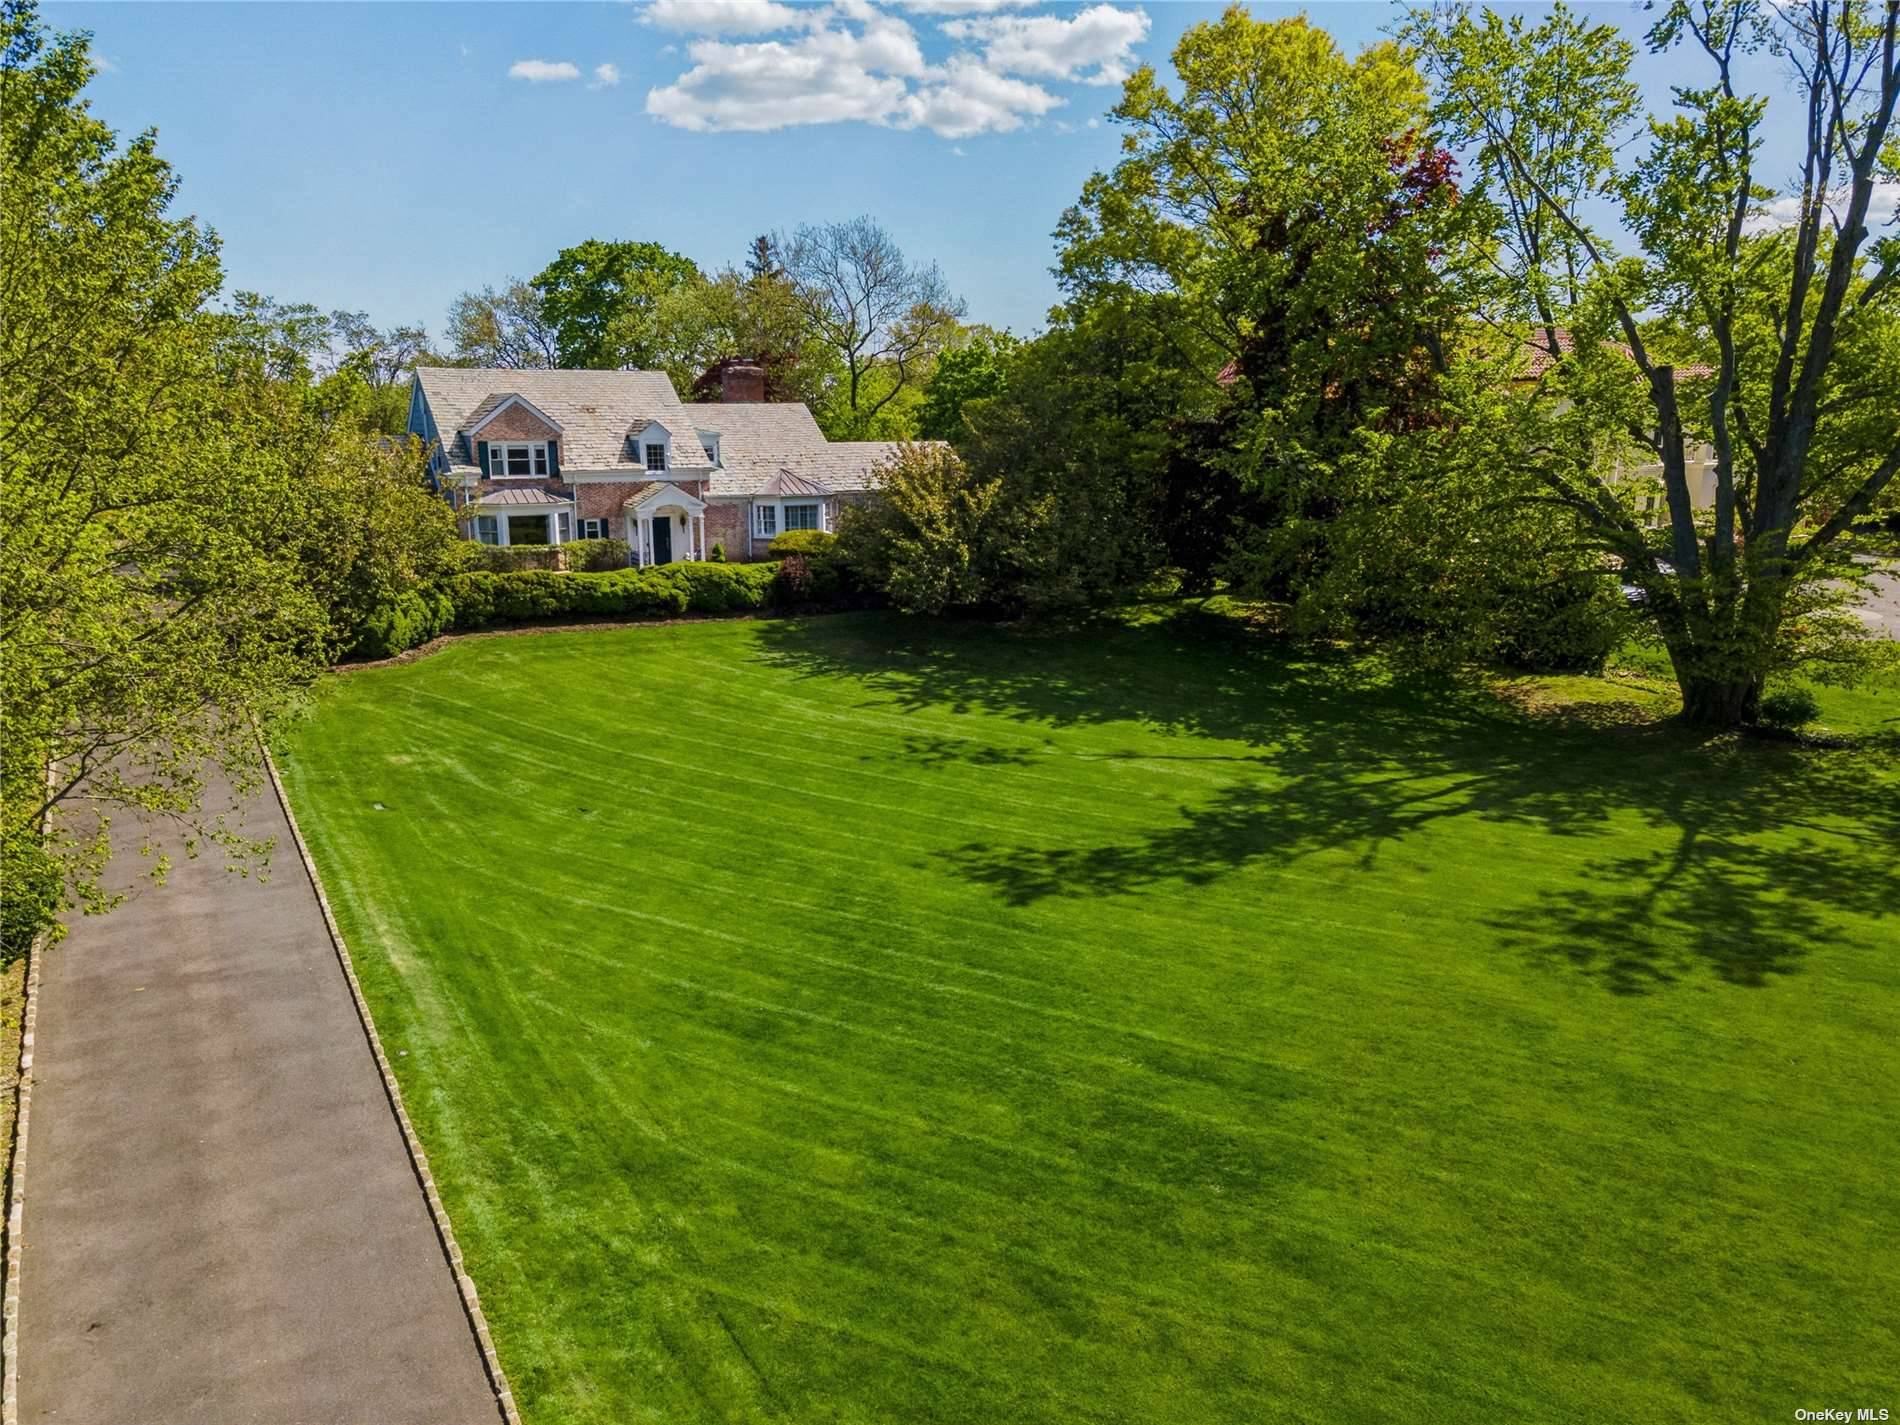 Stately brick colonial on an oversized property in the heart of Hewlett Bay Park.